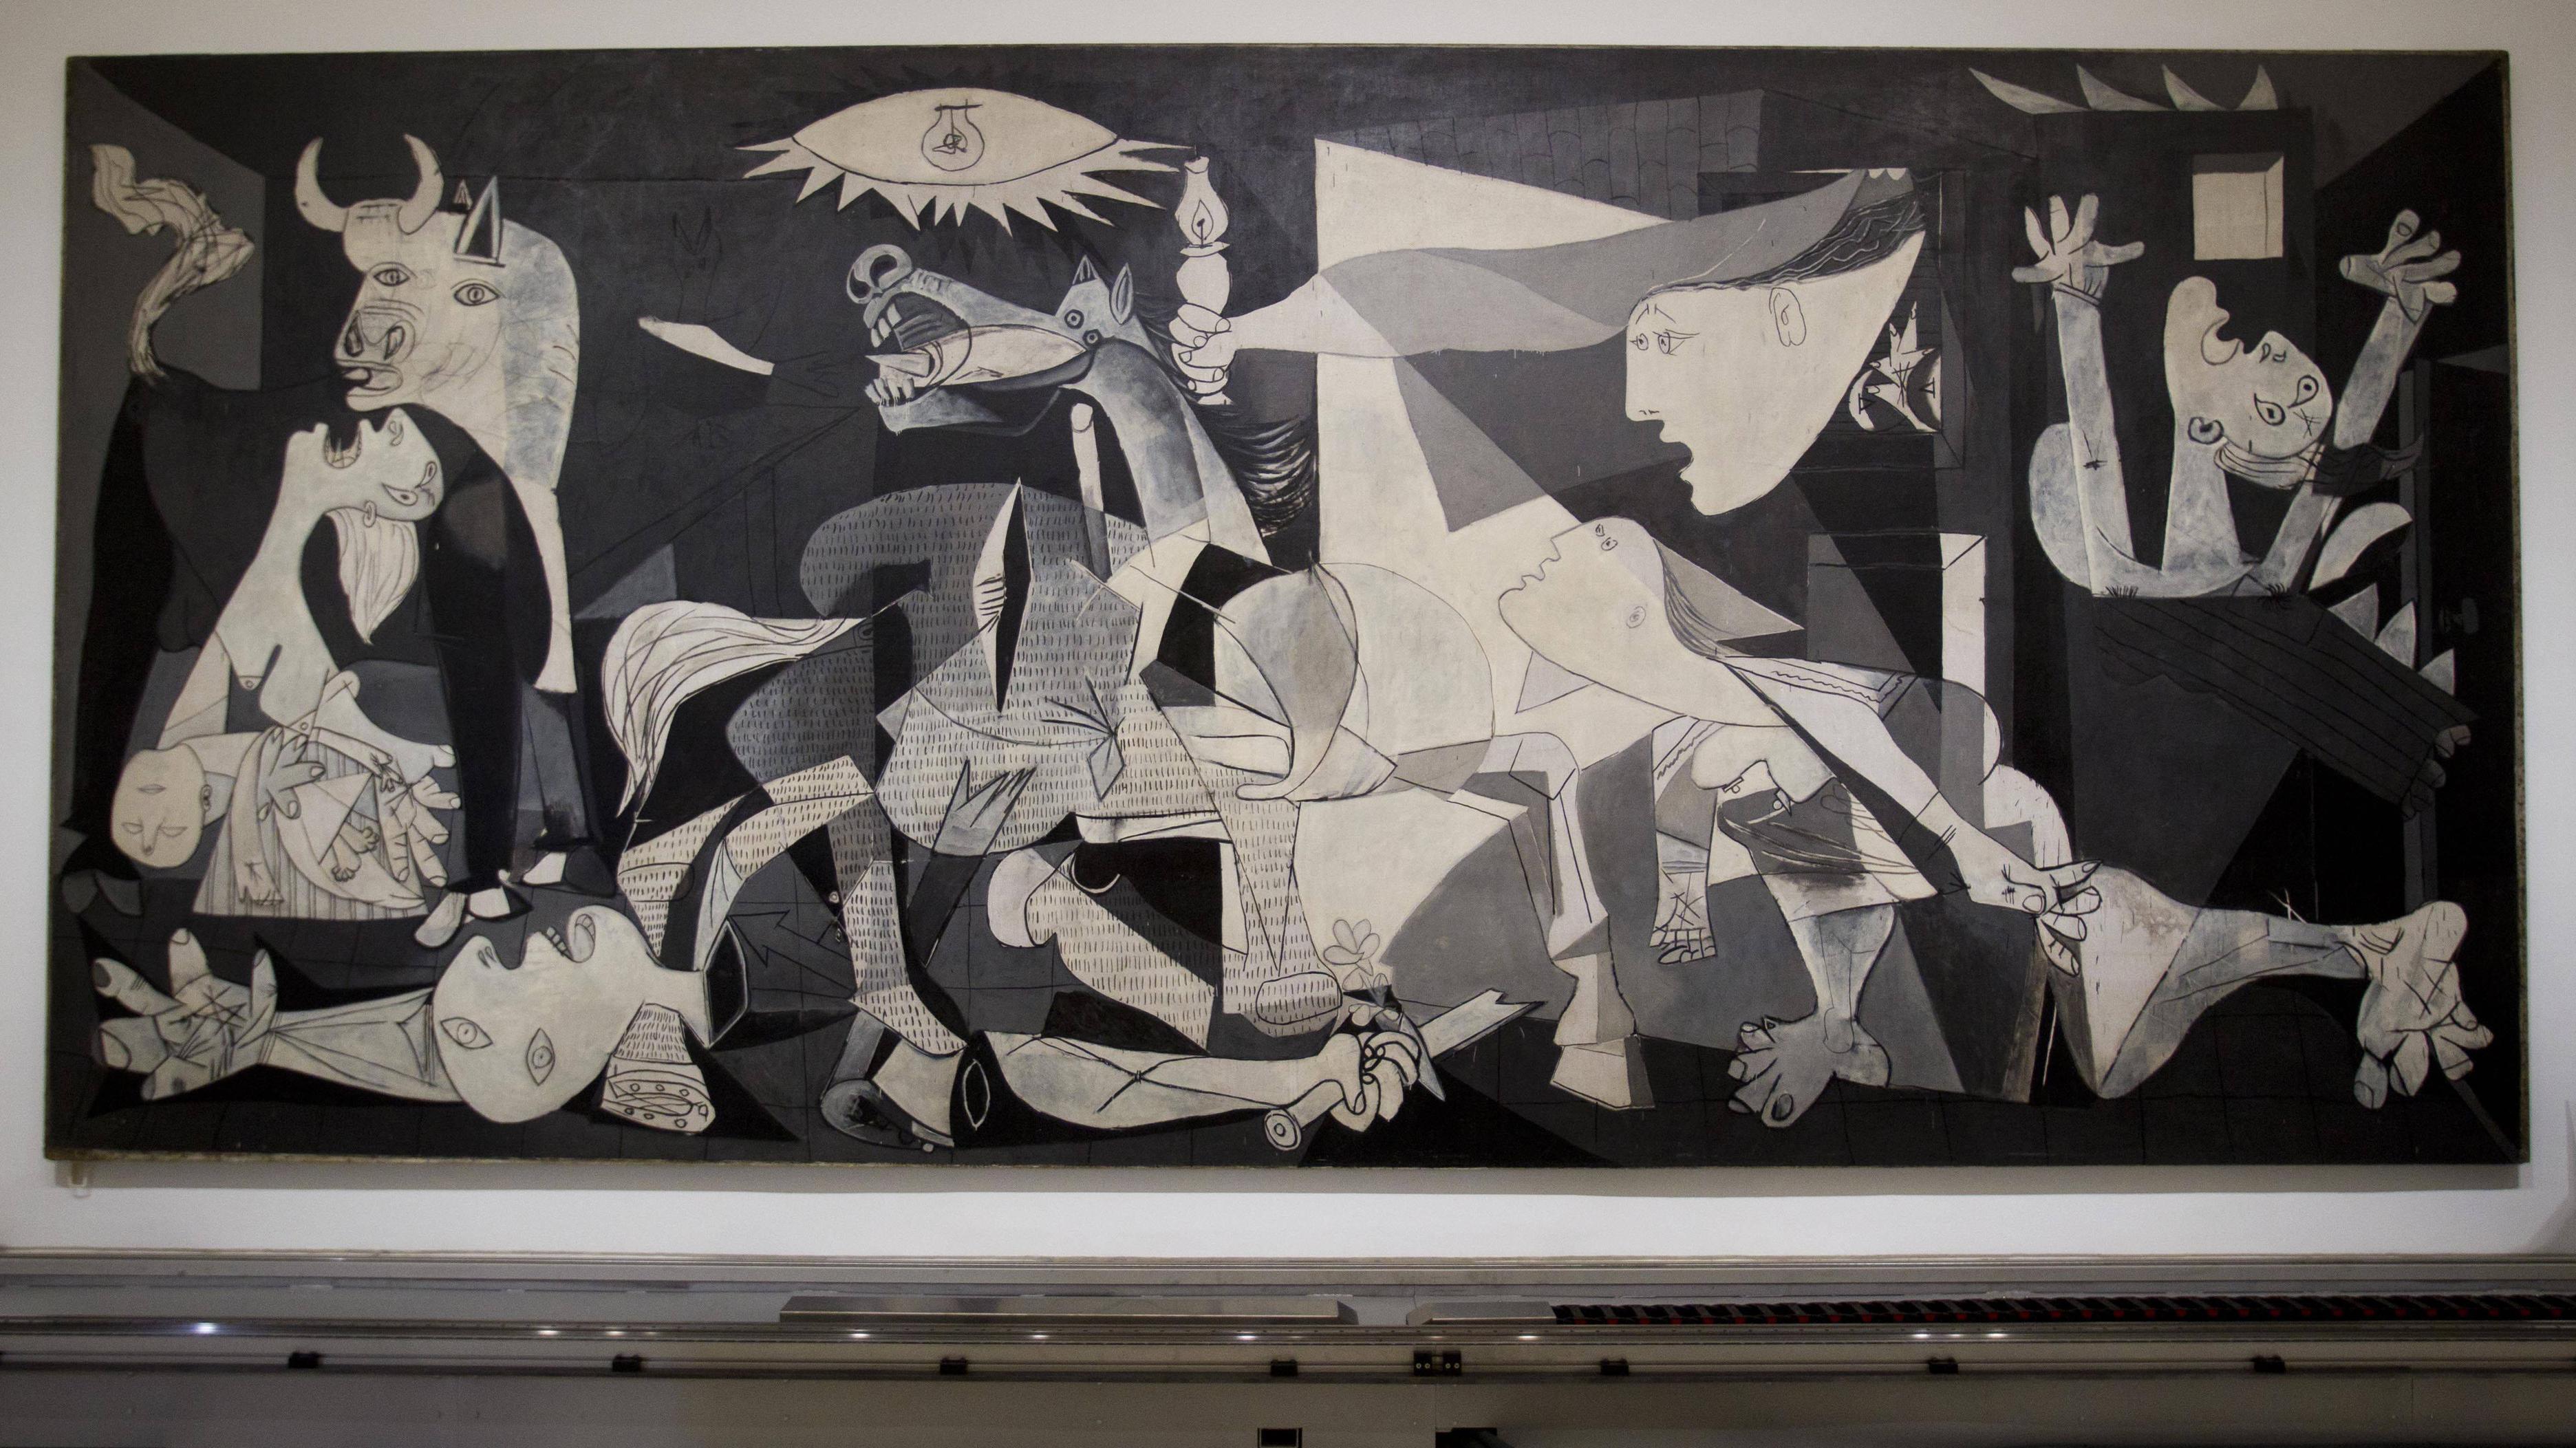 image For > Picasso Guernica Wallpaper